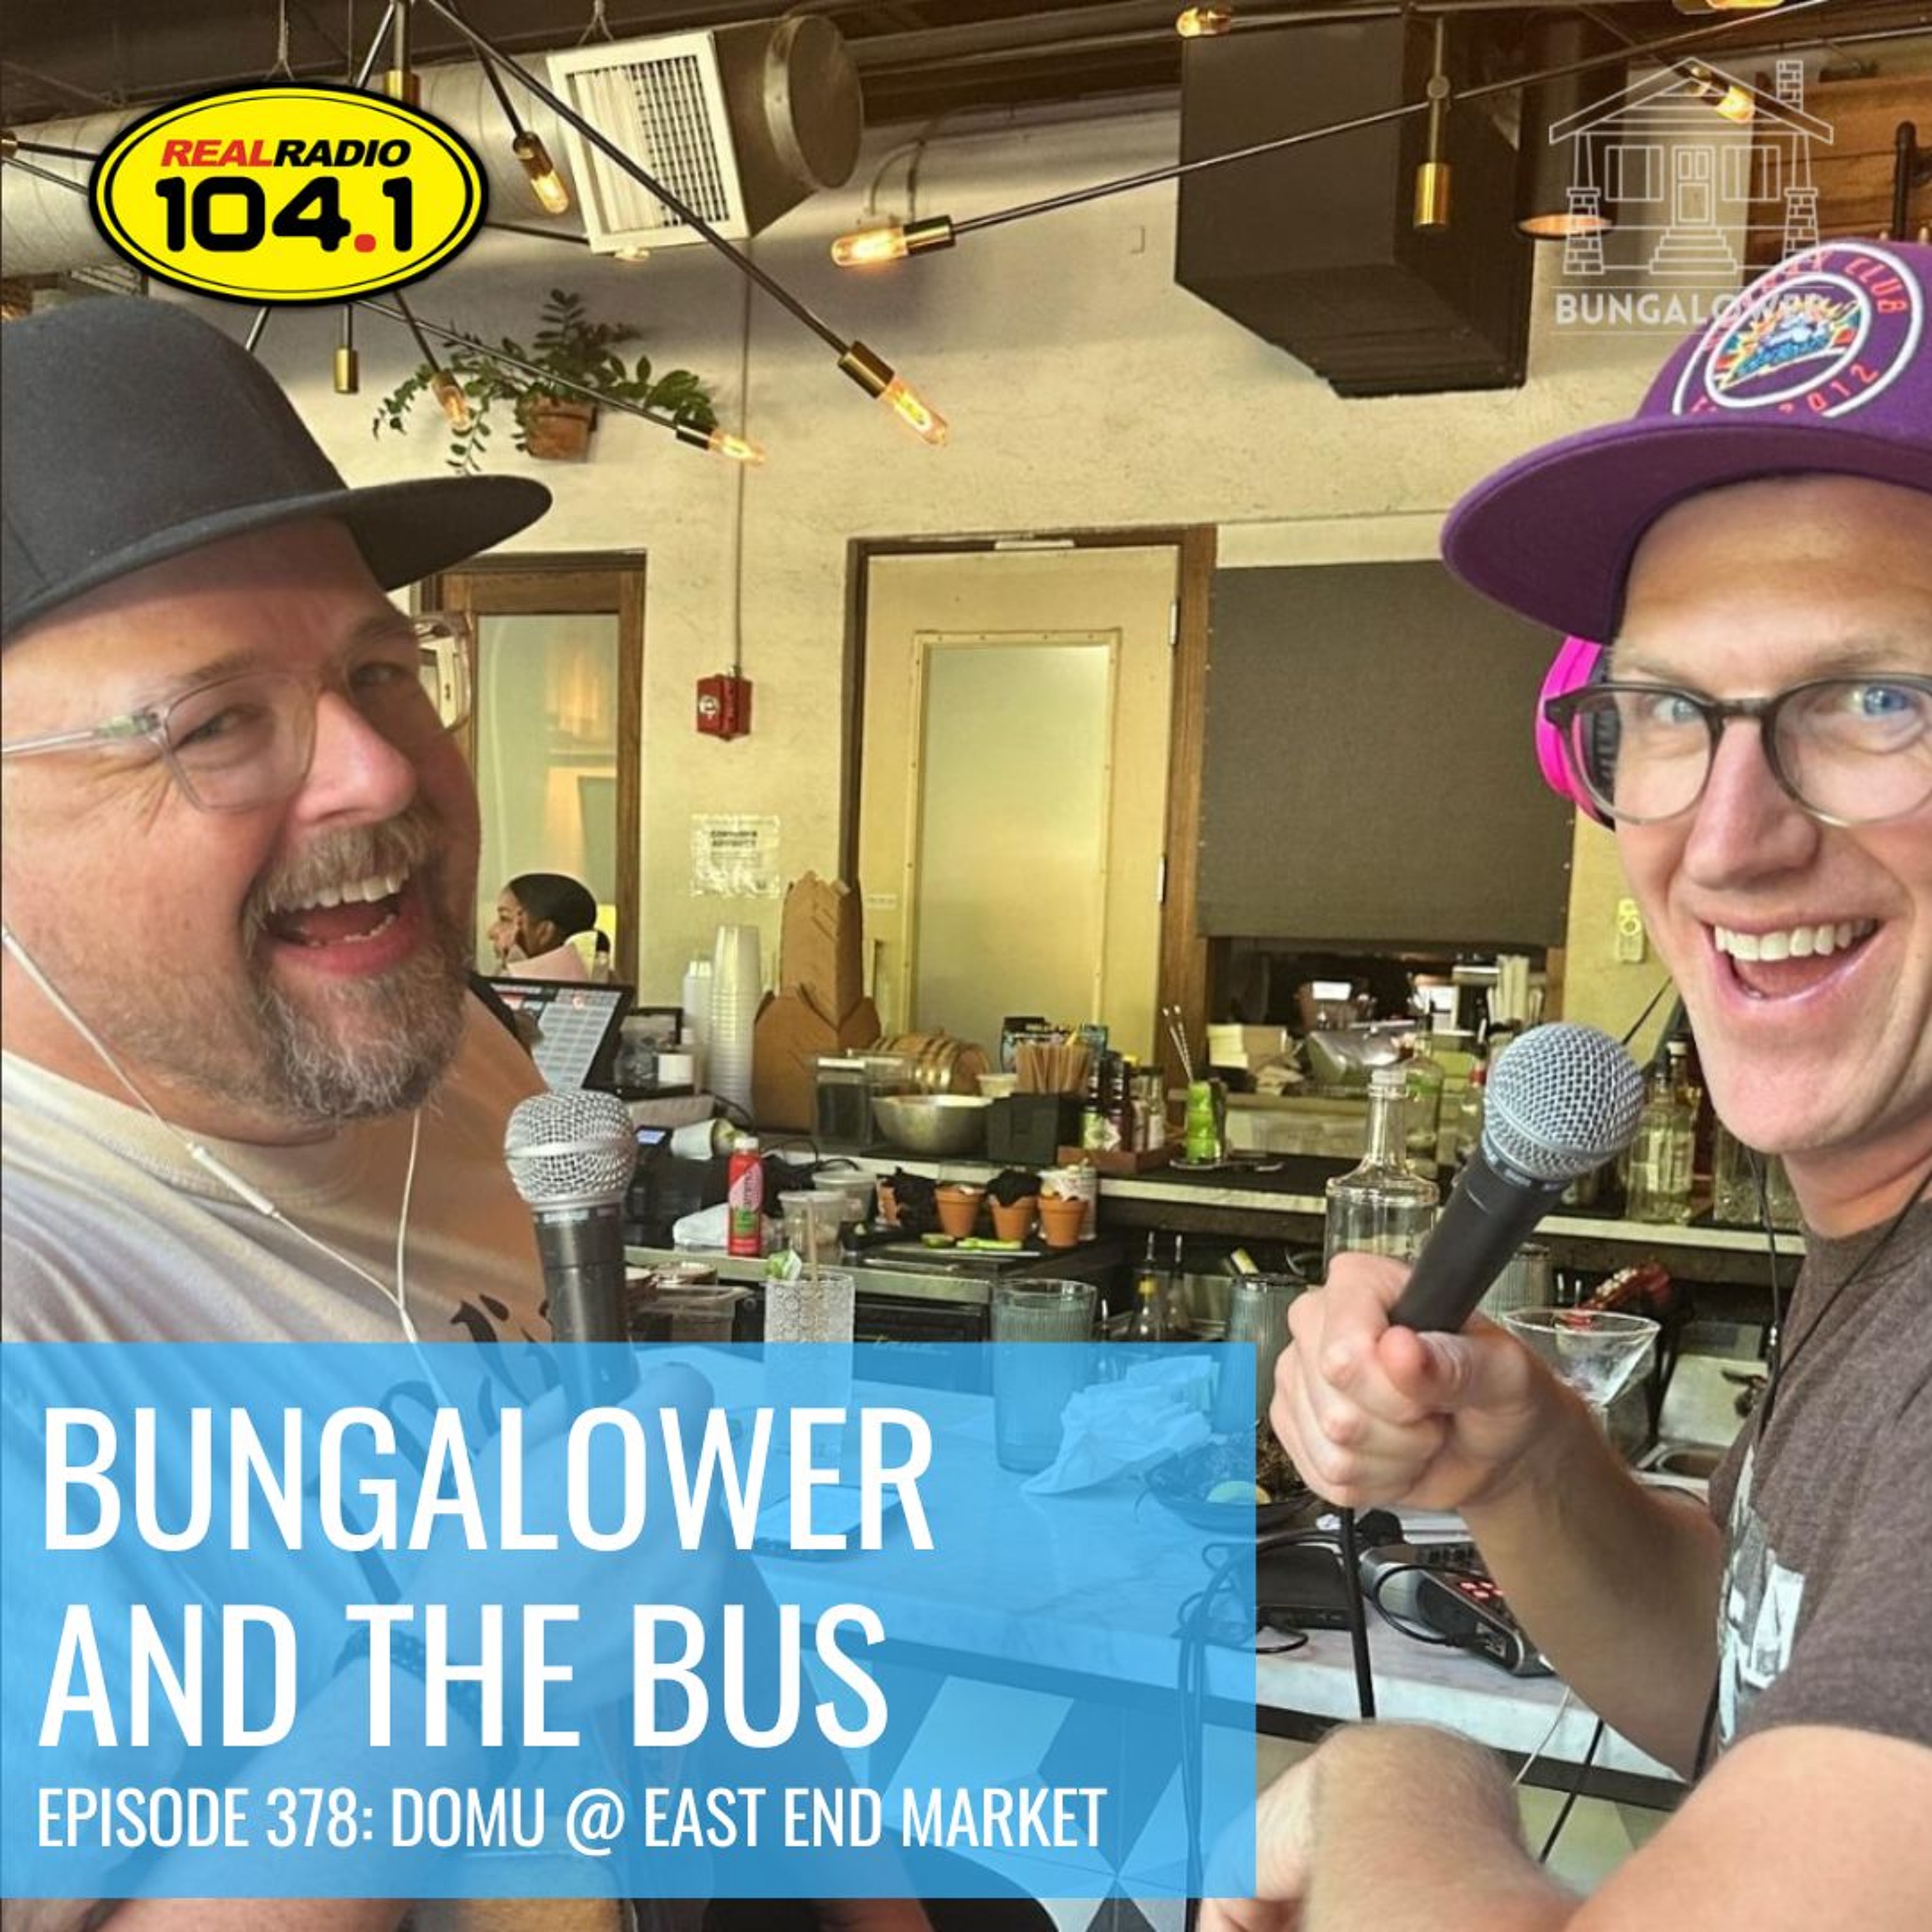 Bungalower and the Bus: Episode 378 (Domu at East End Market)